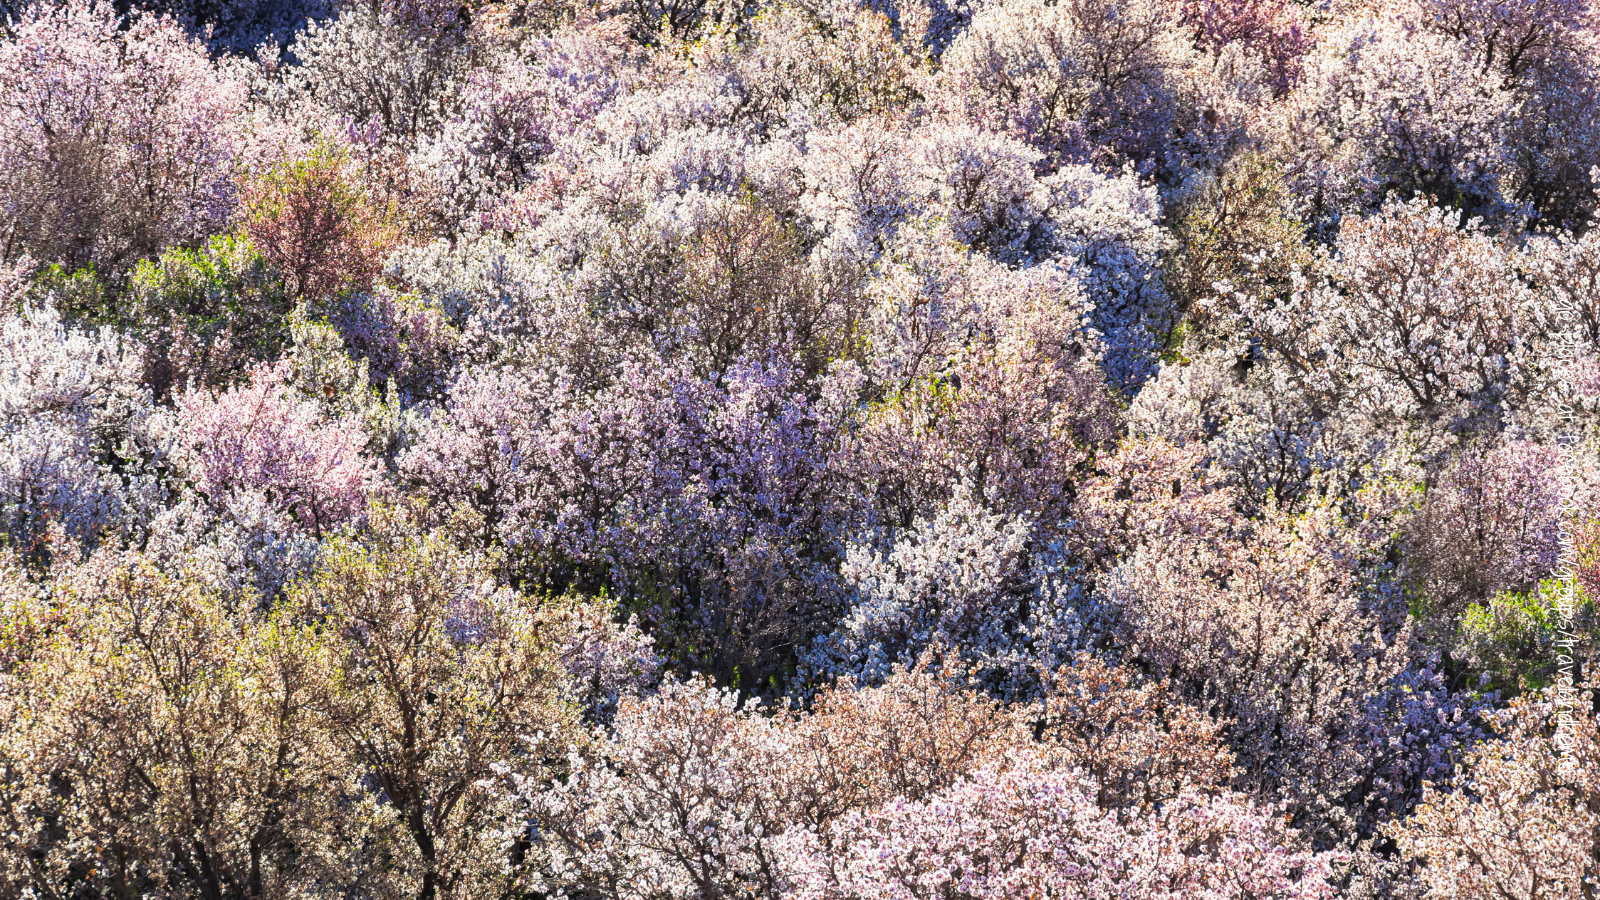 Almond trees in full blossom in the Ounila Valley Morocco flowers in bloom